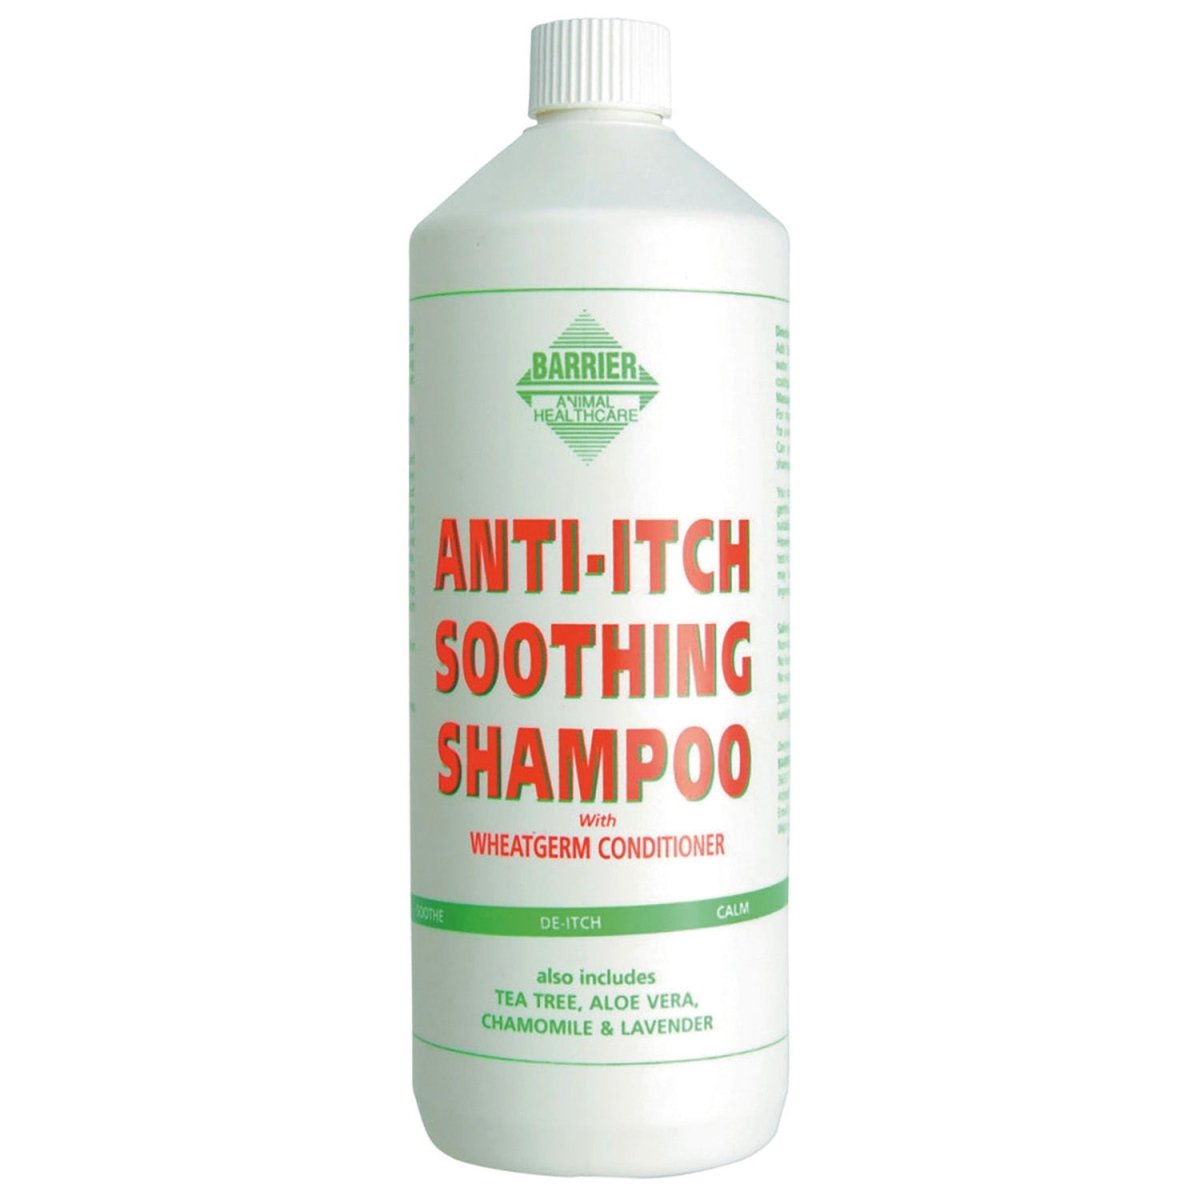 Barrier Anti-Itch Soothing Shampoo - 1Lt -